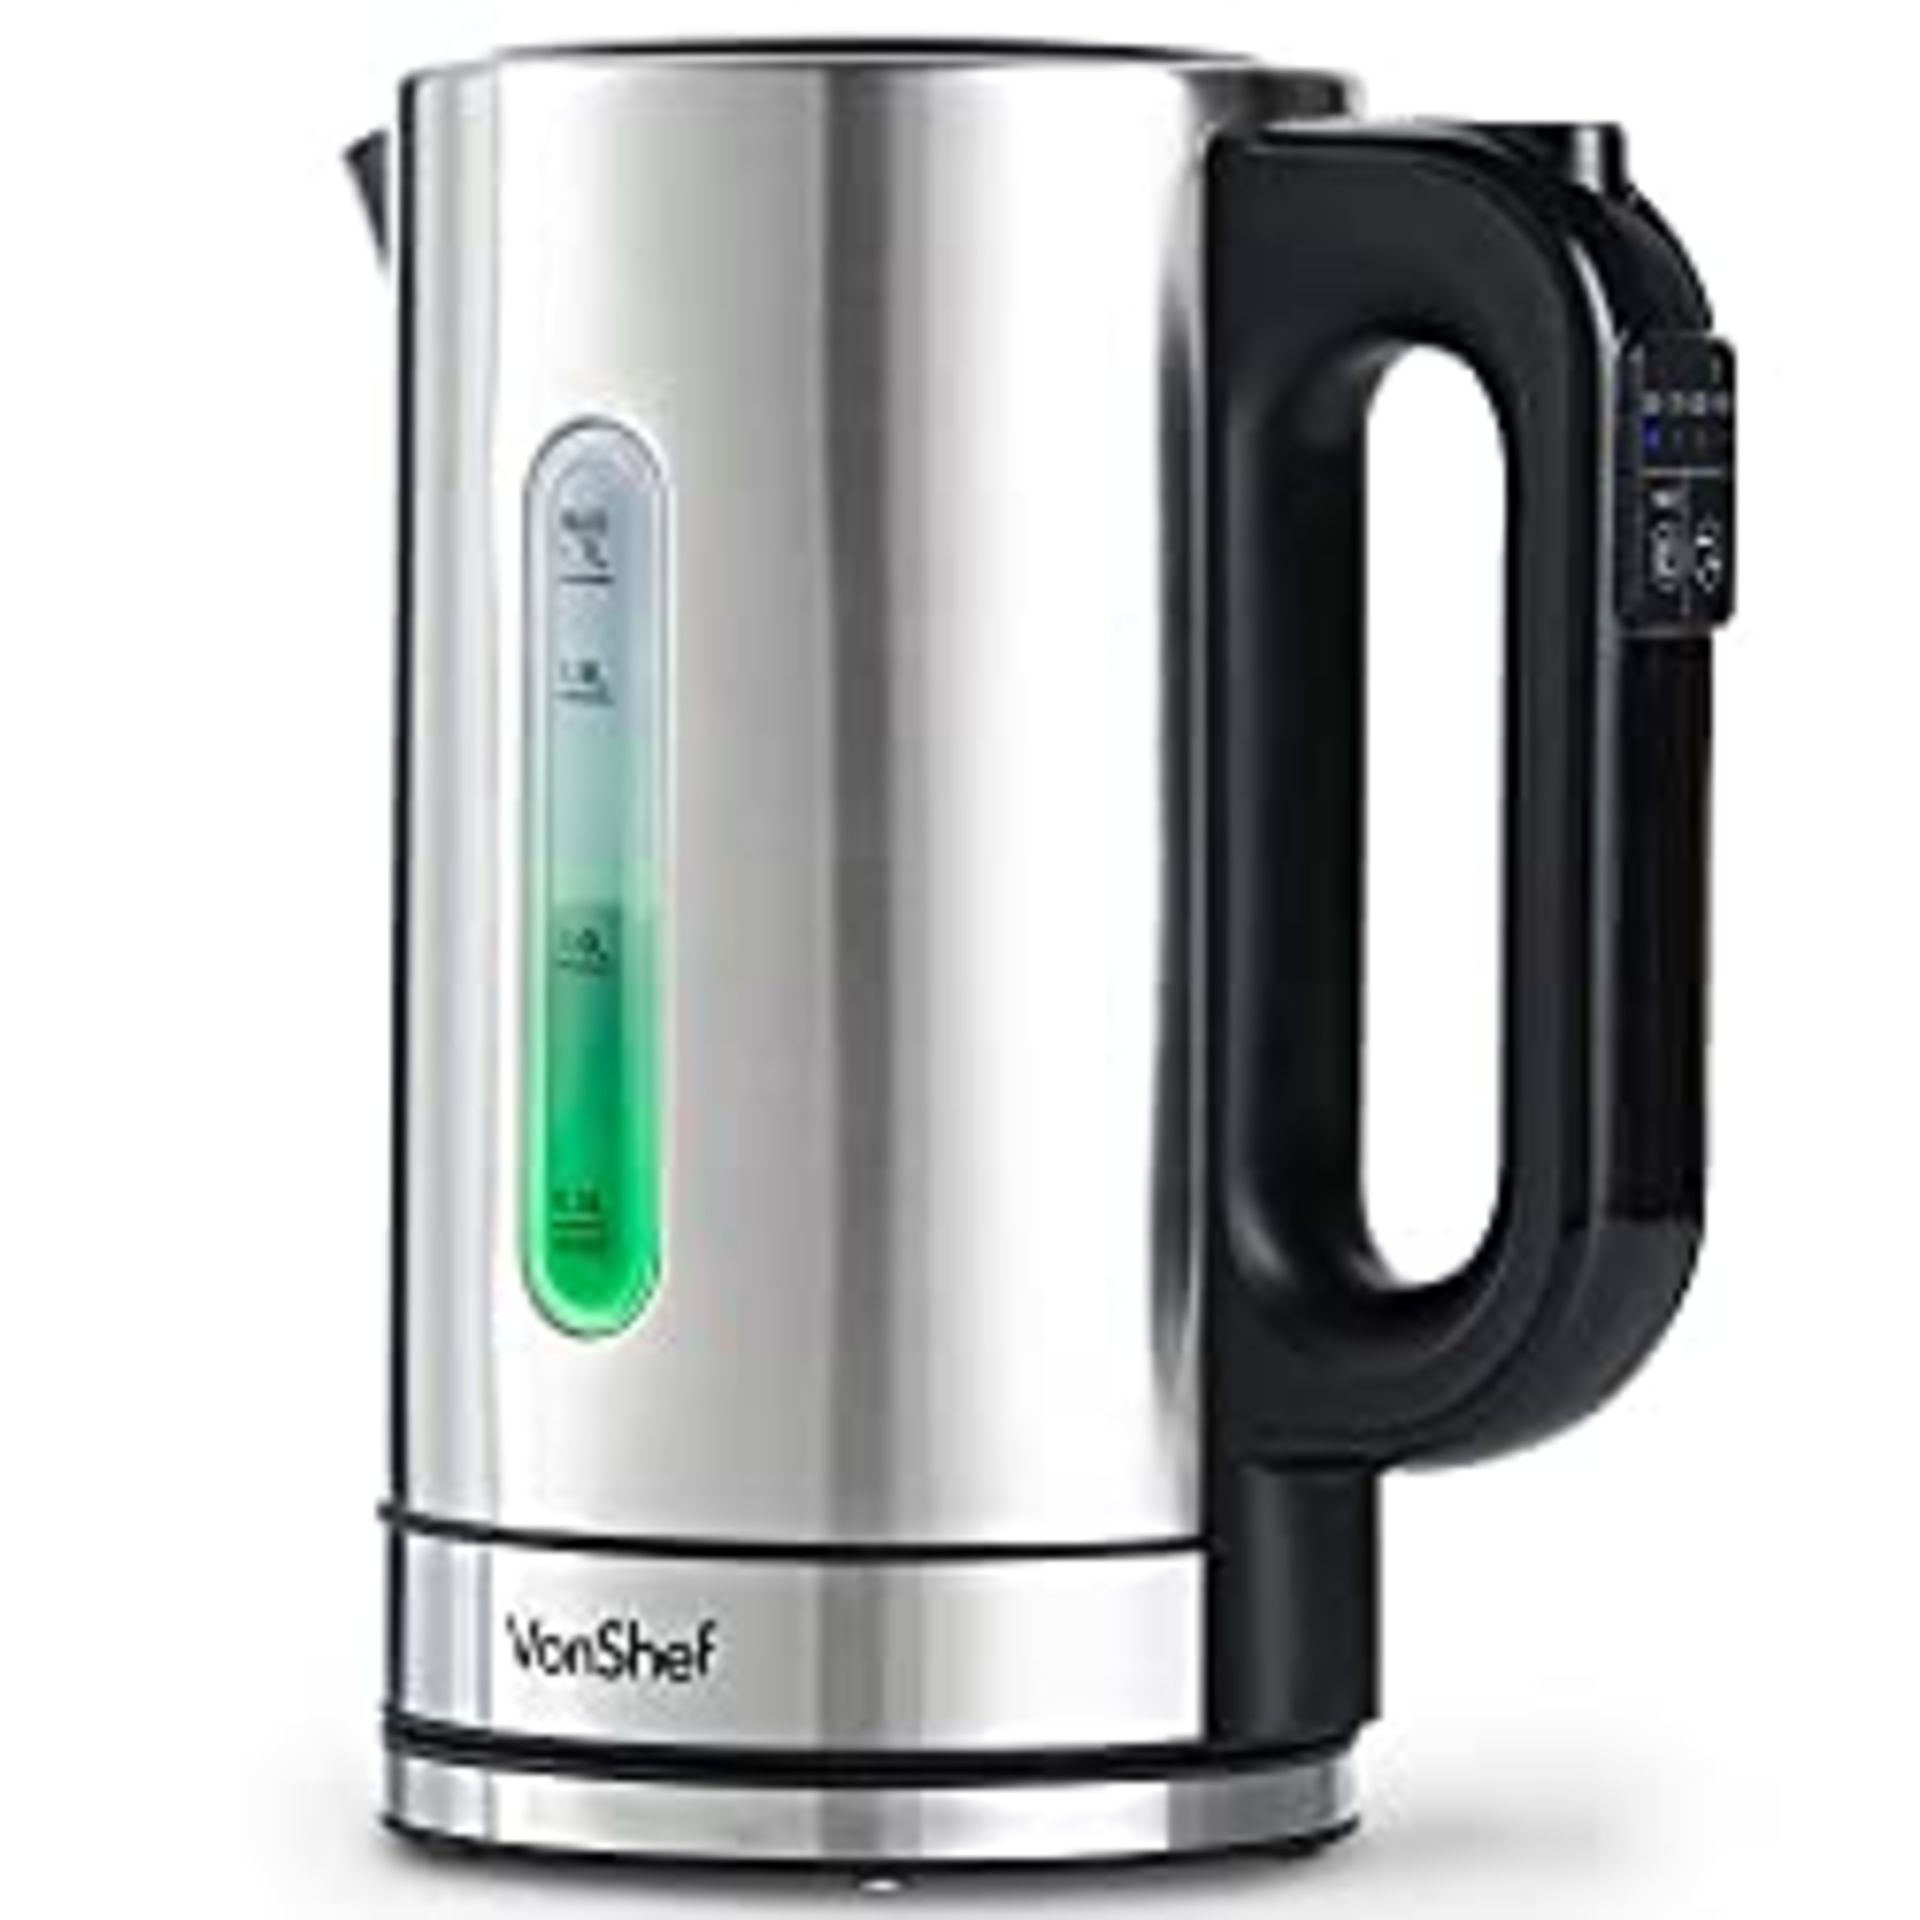 RRP £44.99 VonShef Electric Kettle with Variable Temperature Control